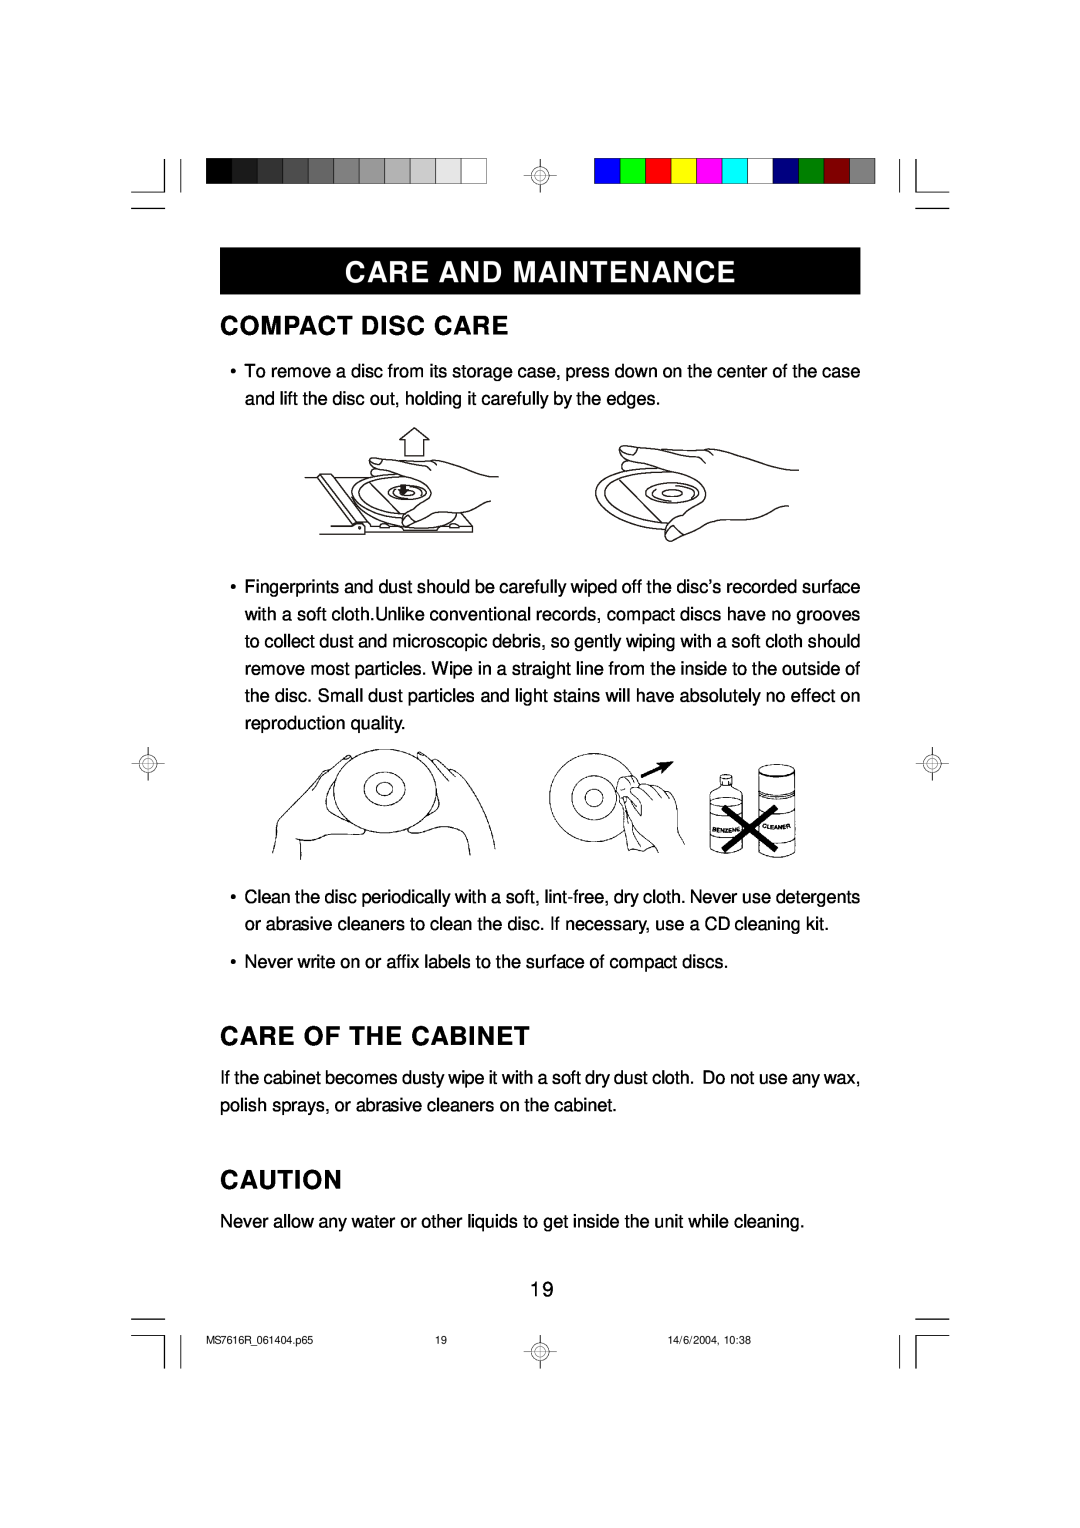 Emerson MS7616R owner manual Care And Maintenance, Compact Disc Care, Care Of The Cabinet 